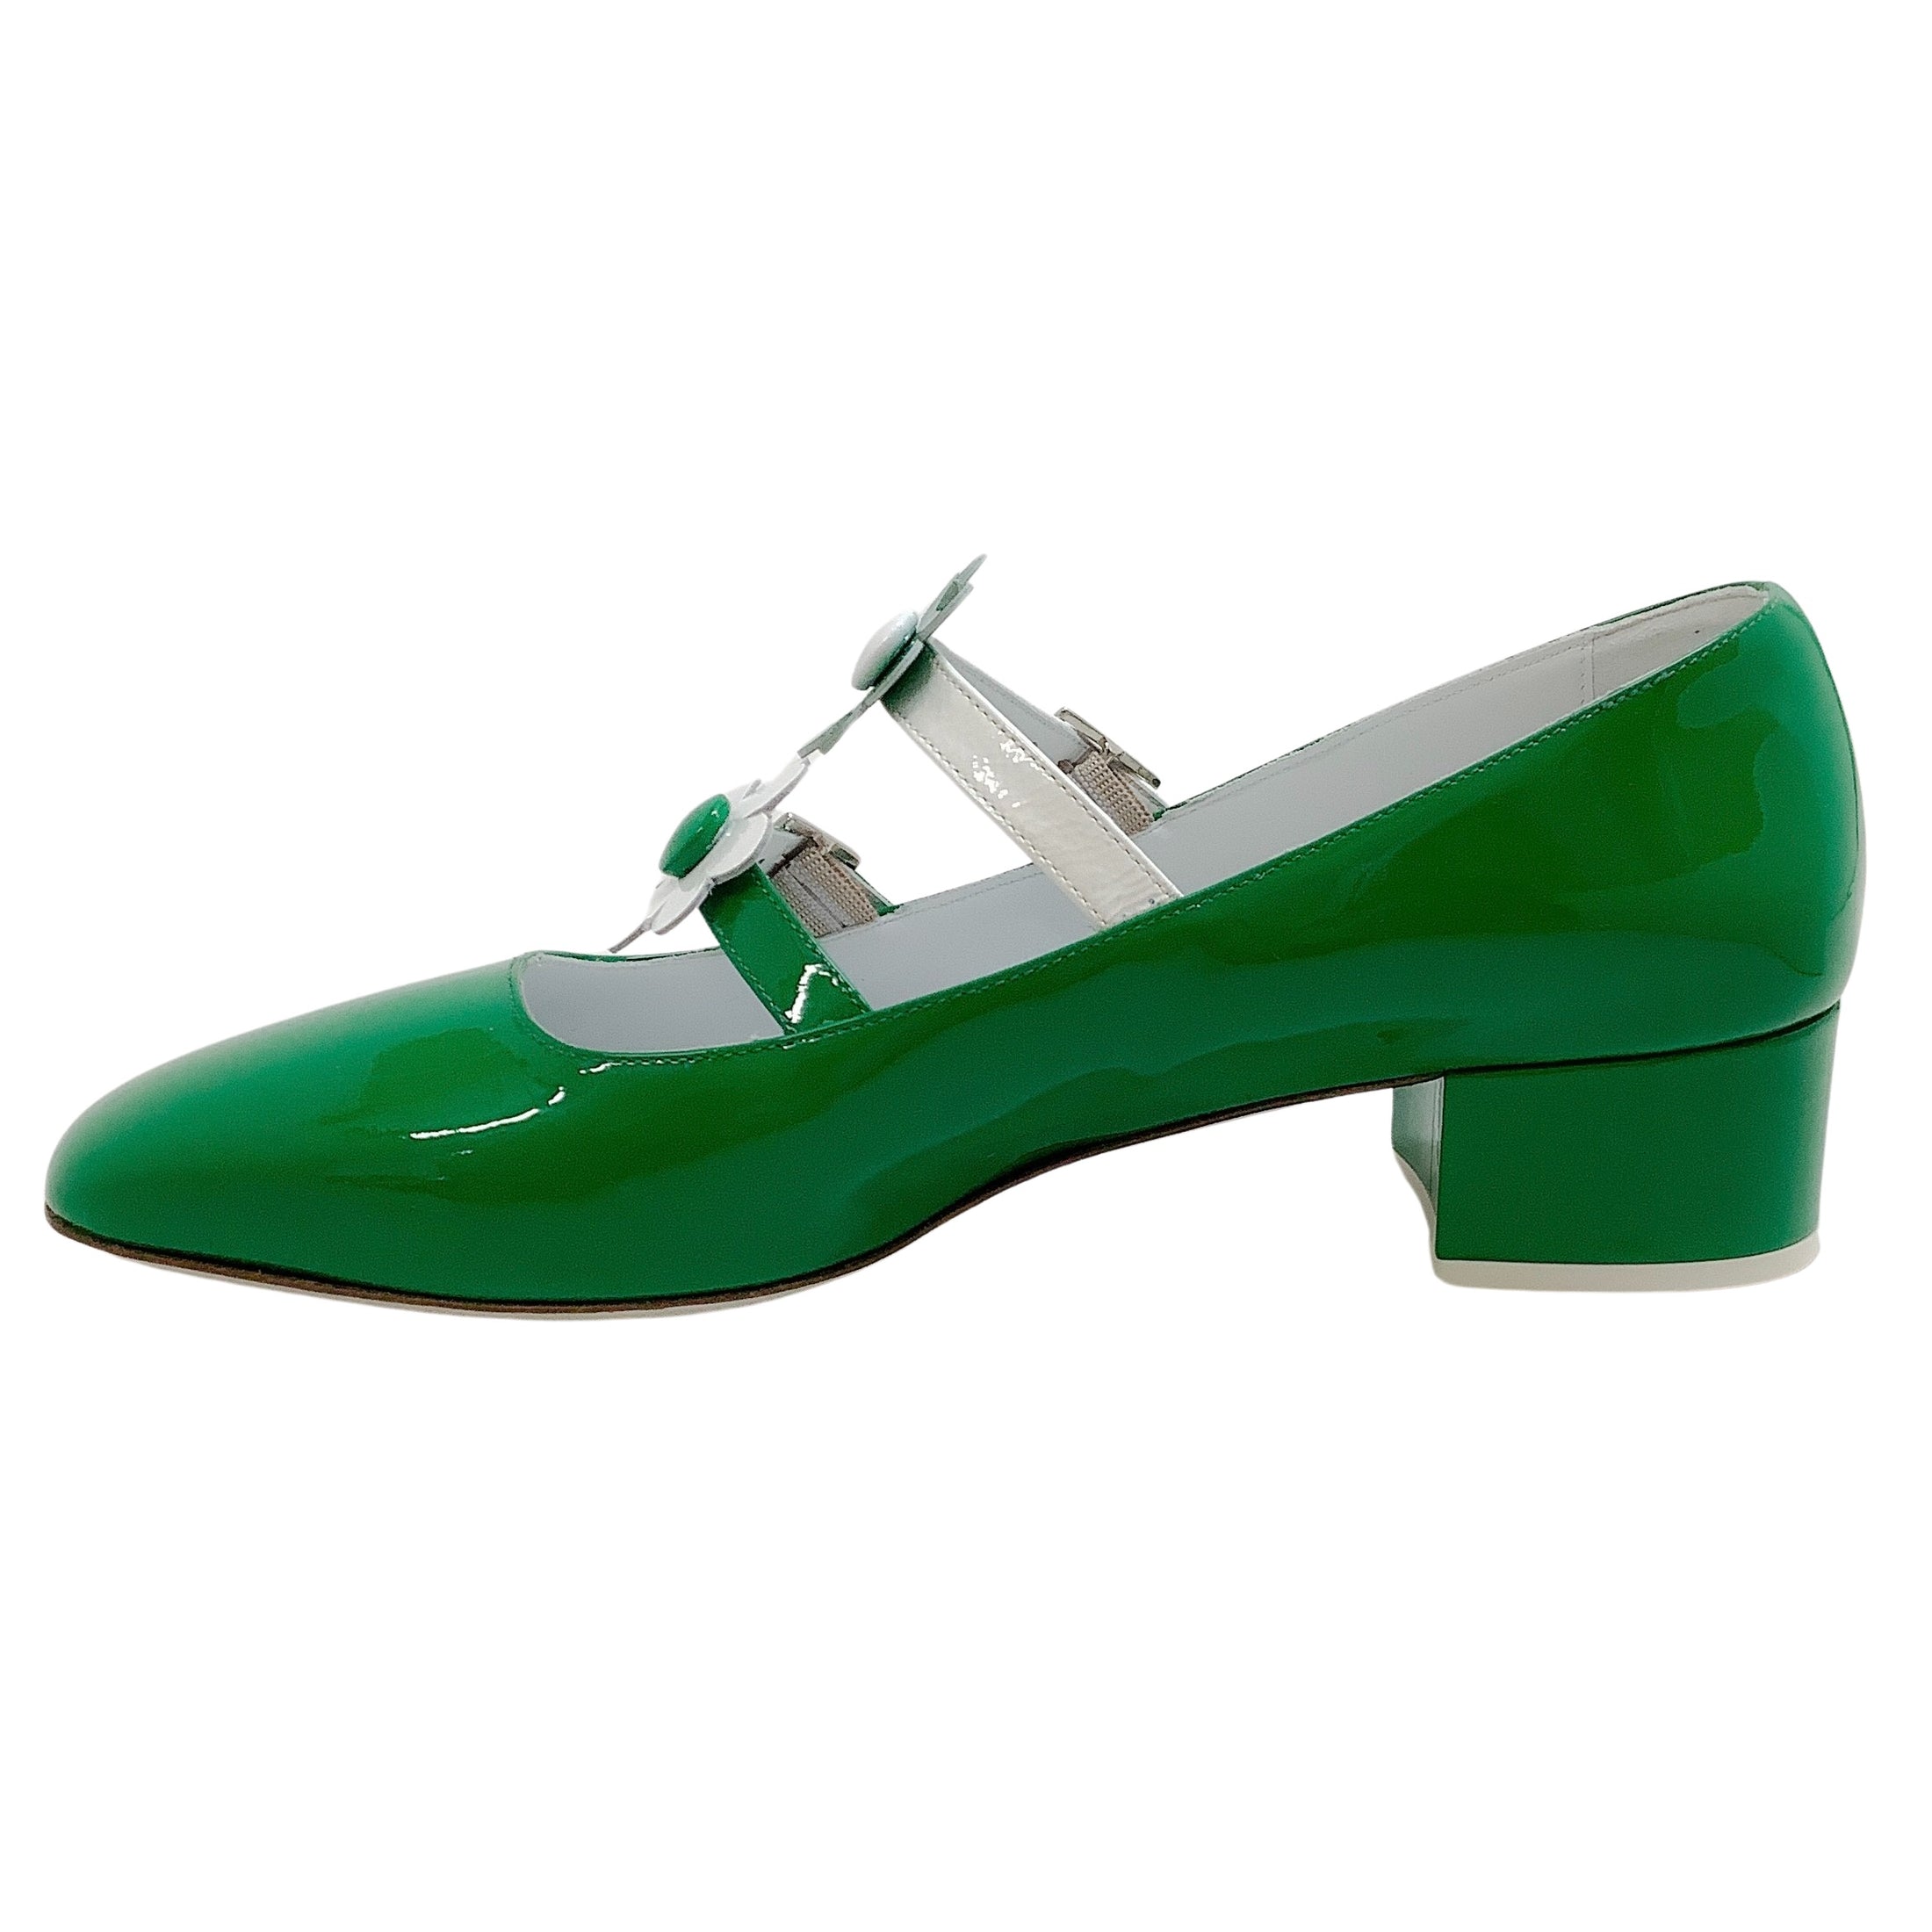 Vivetta Green / White Patent Leather Mary Jane Pumps with Flower Embellishments